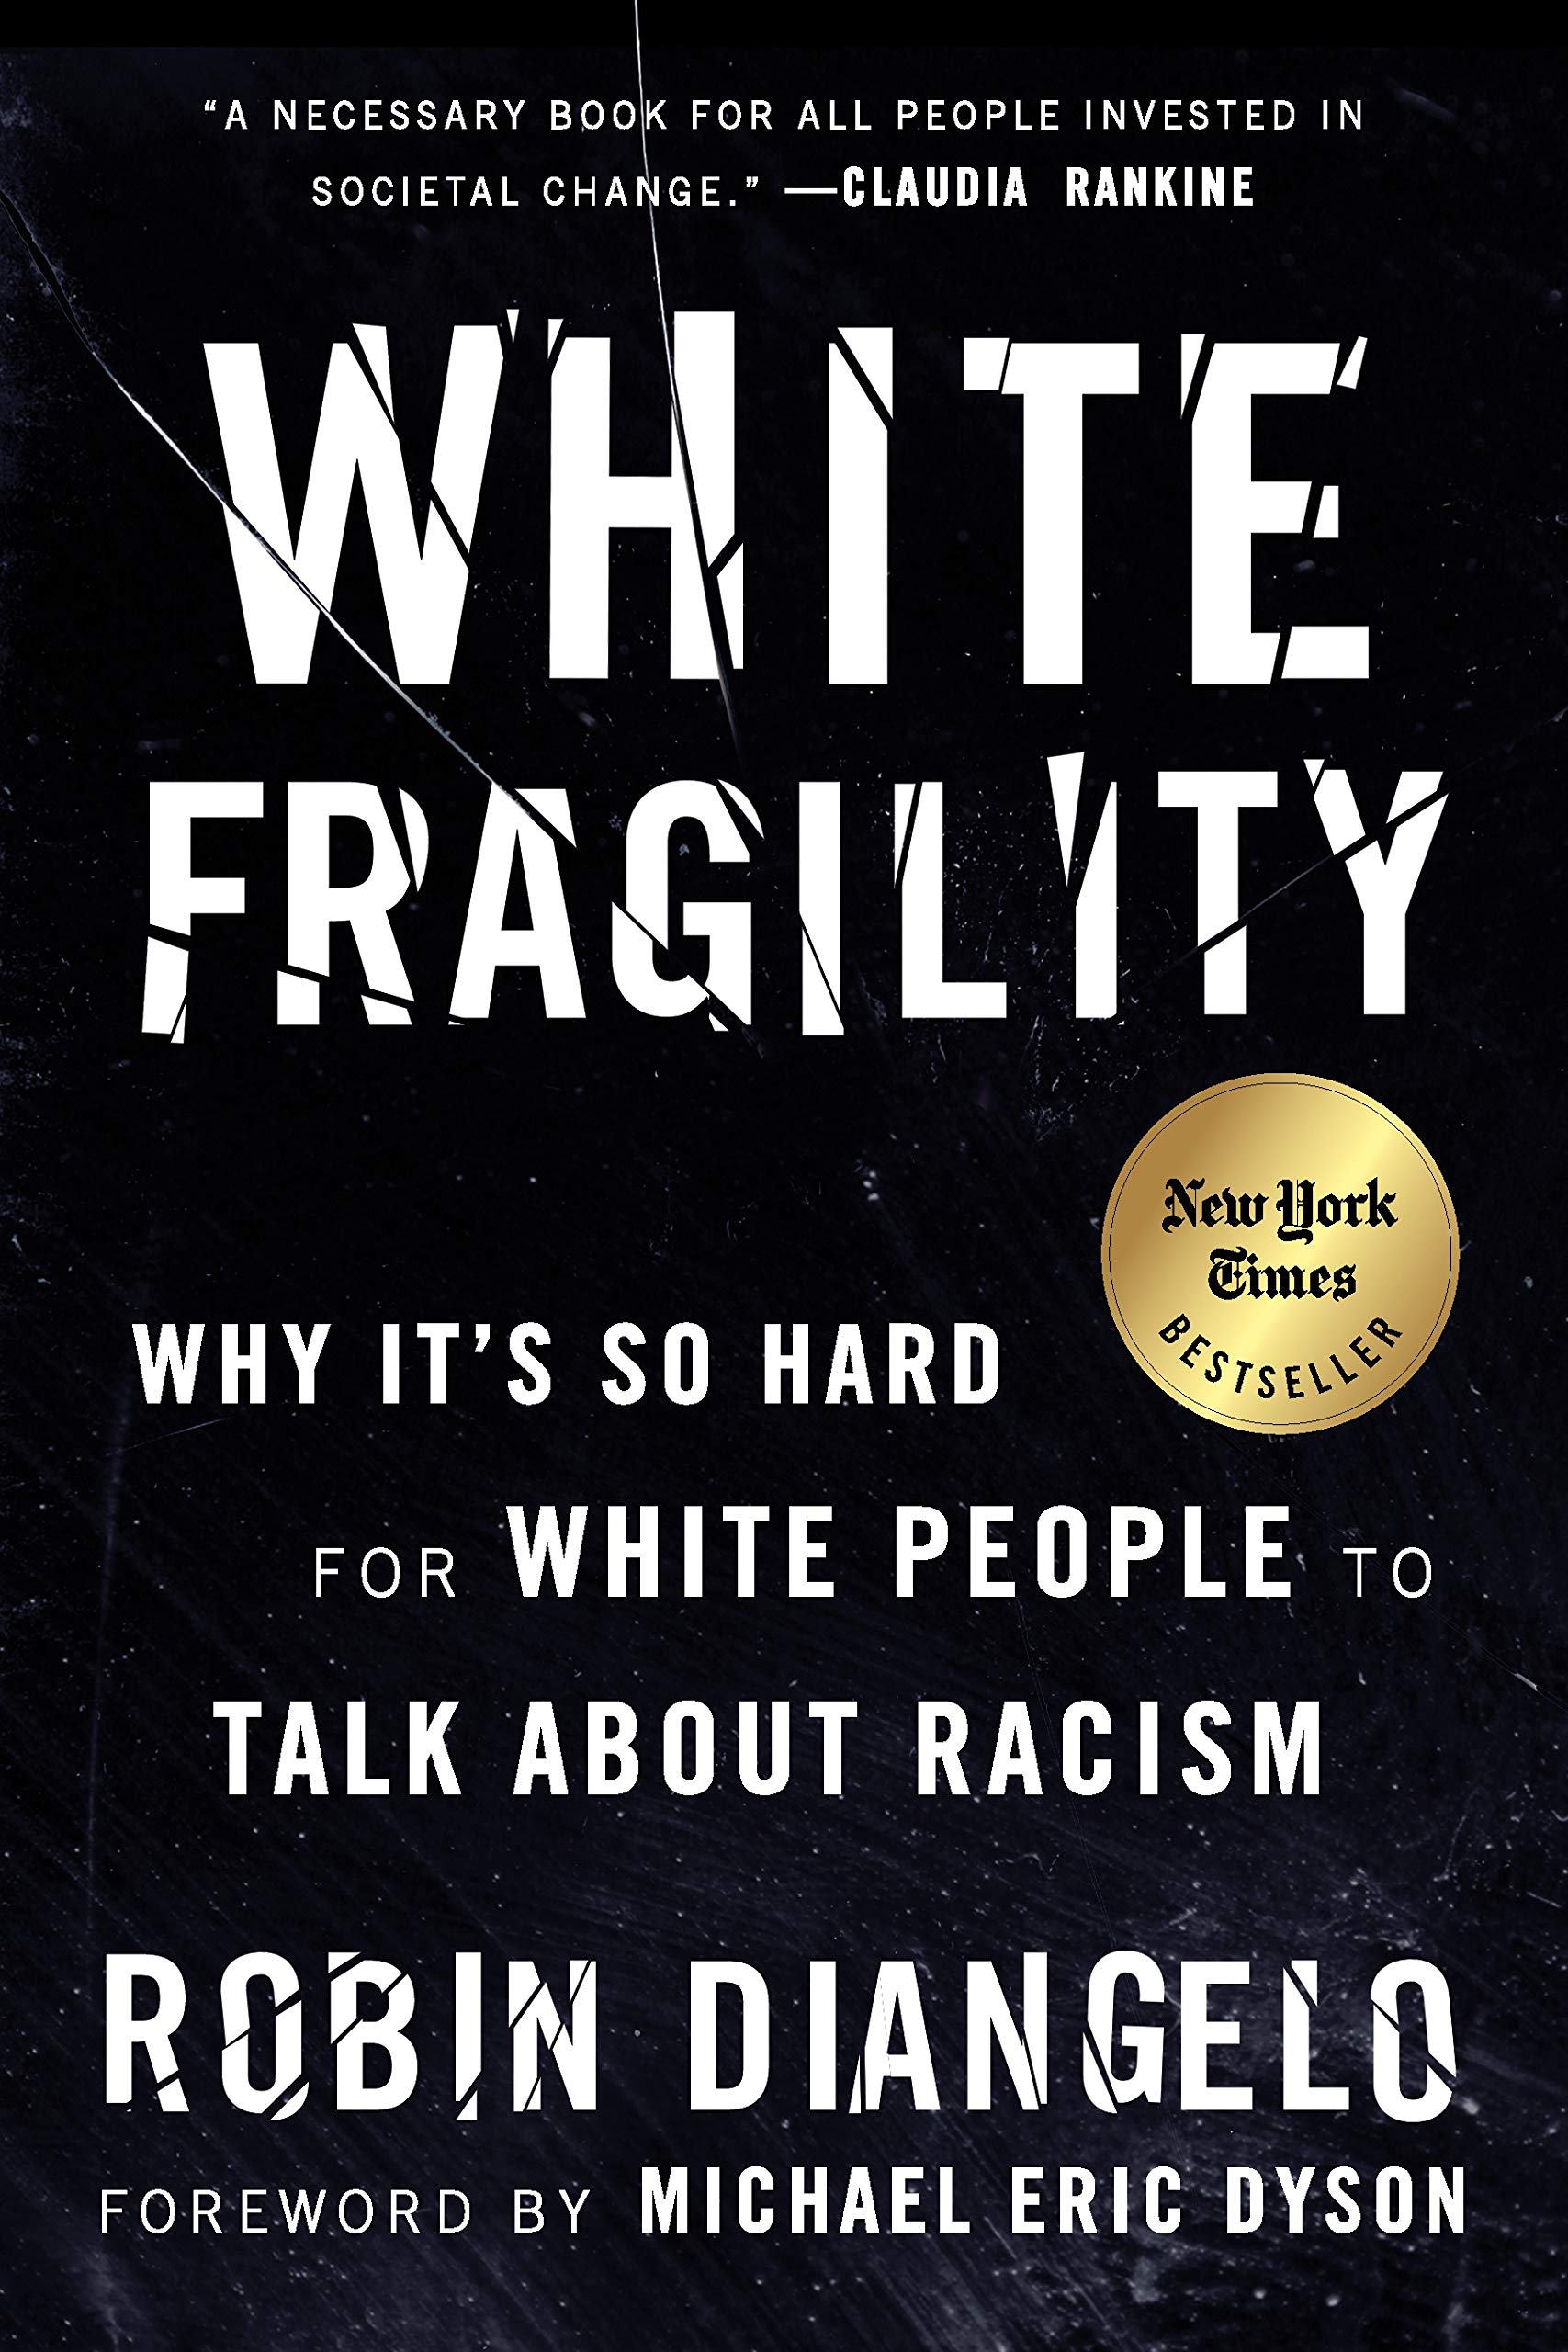 Friday Reads: White Fragility: Why It’s So Hard for White People to Talk About Racism by Robin DiAngelo